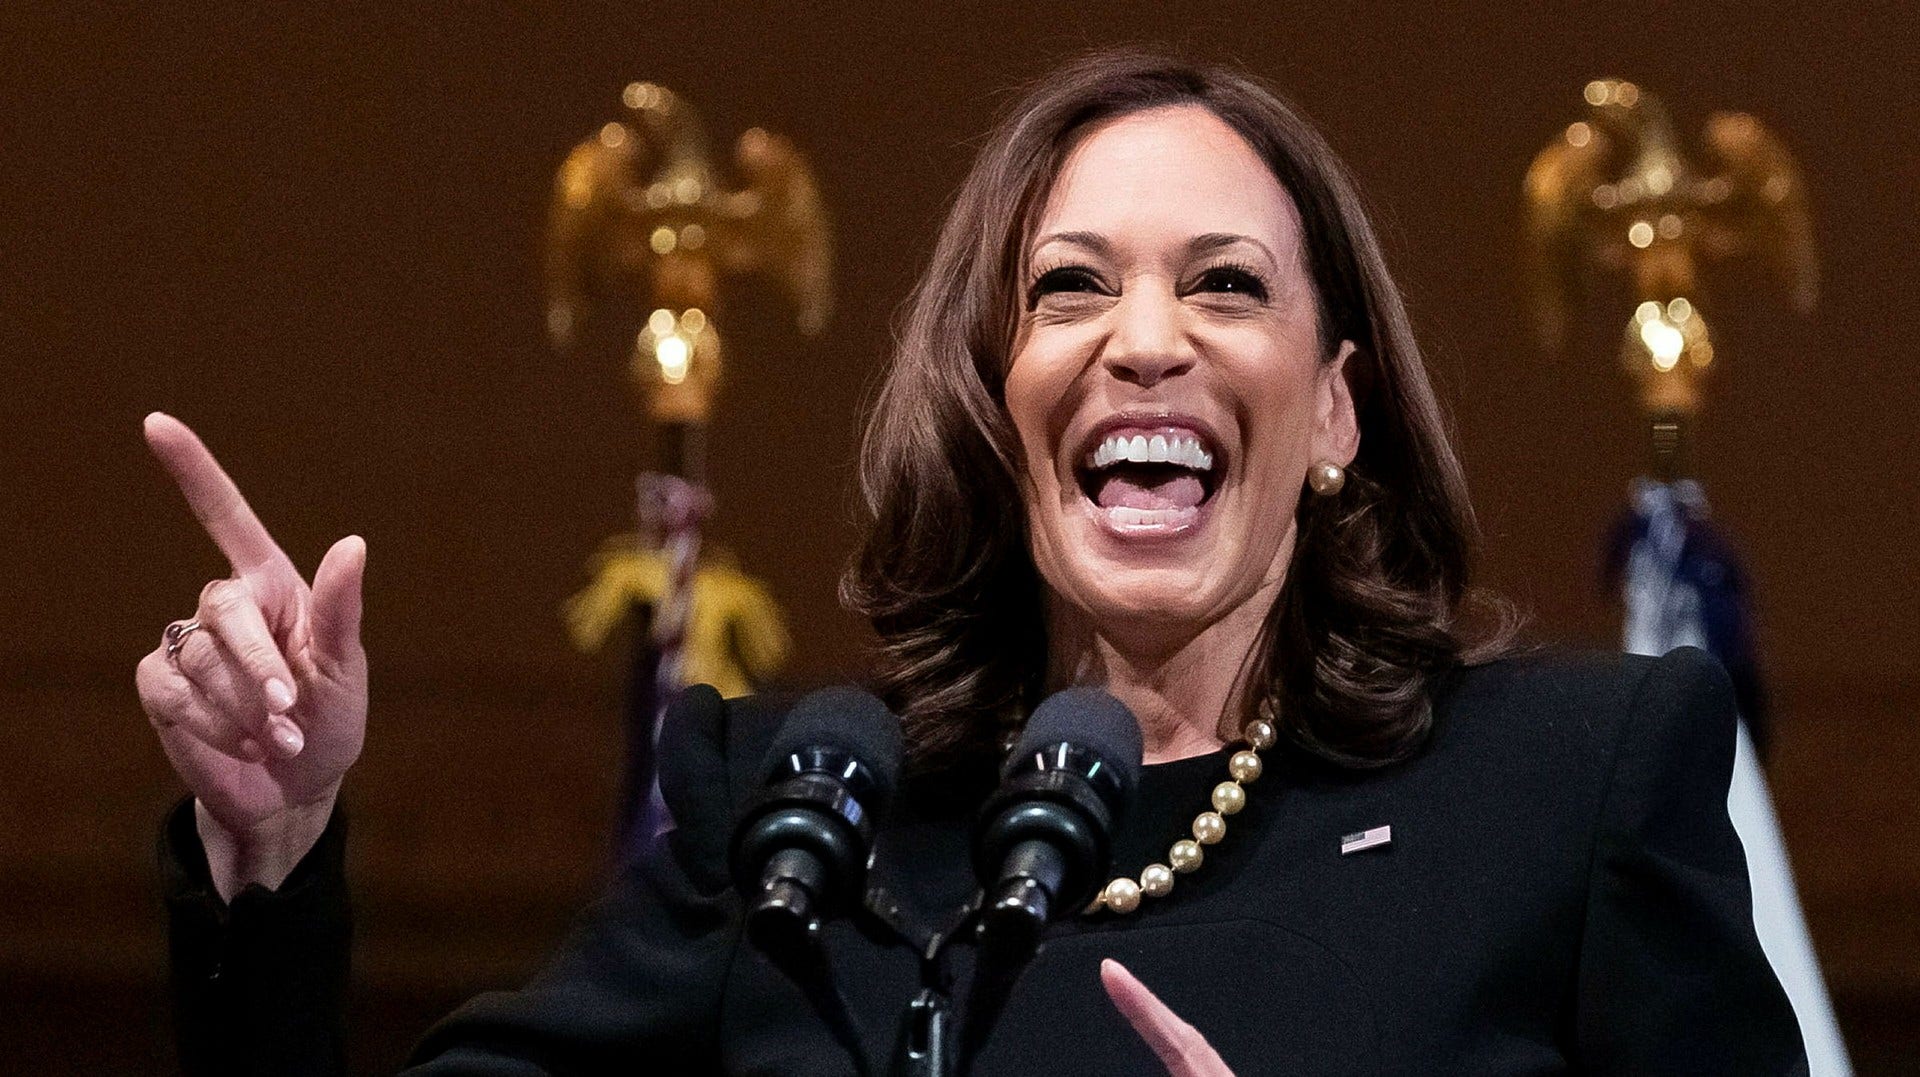 Kamala Harris is being celebrated with coconuts on social media.